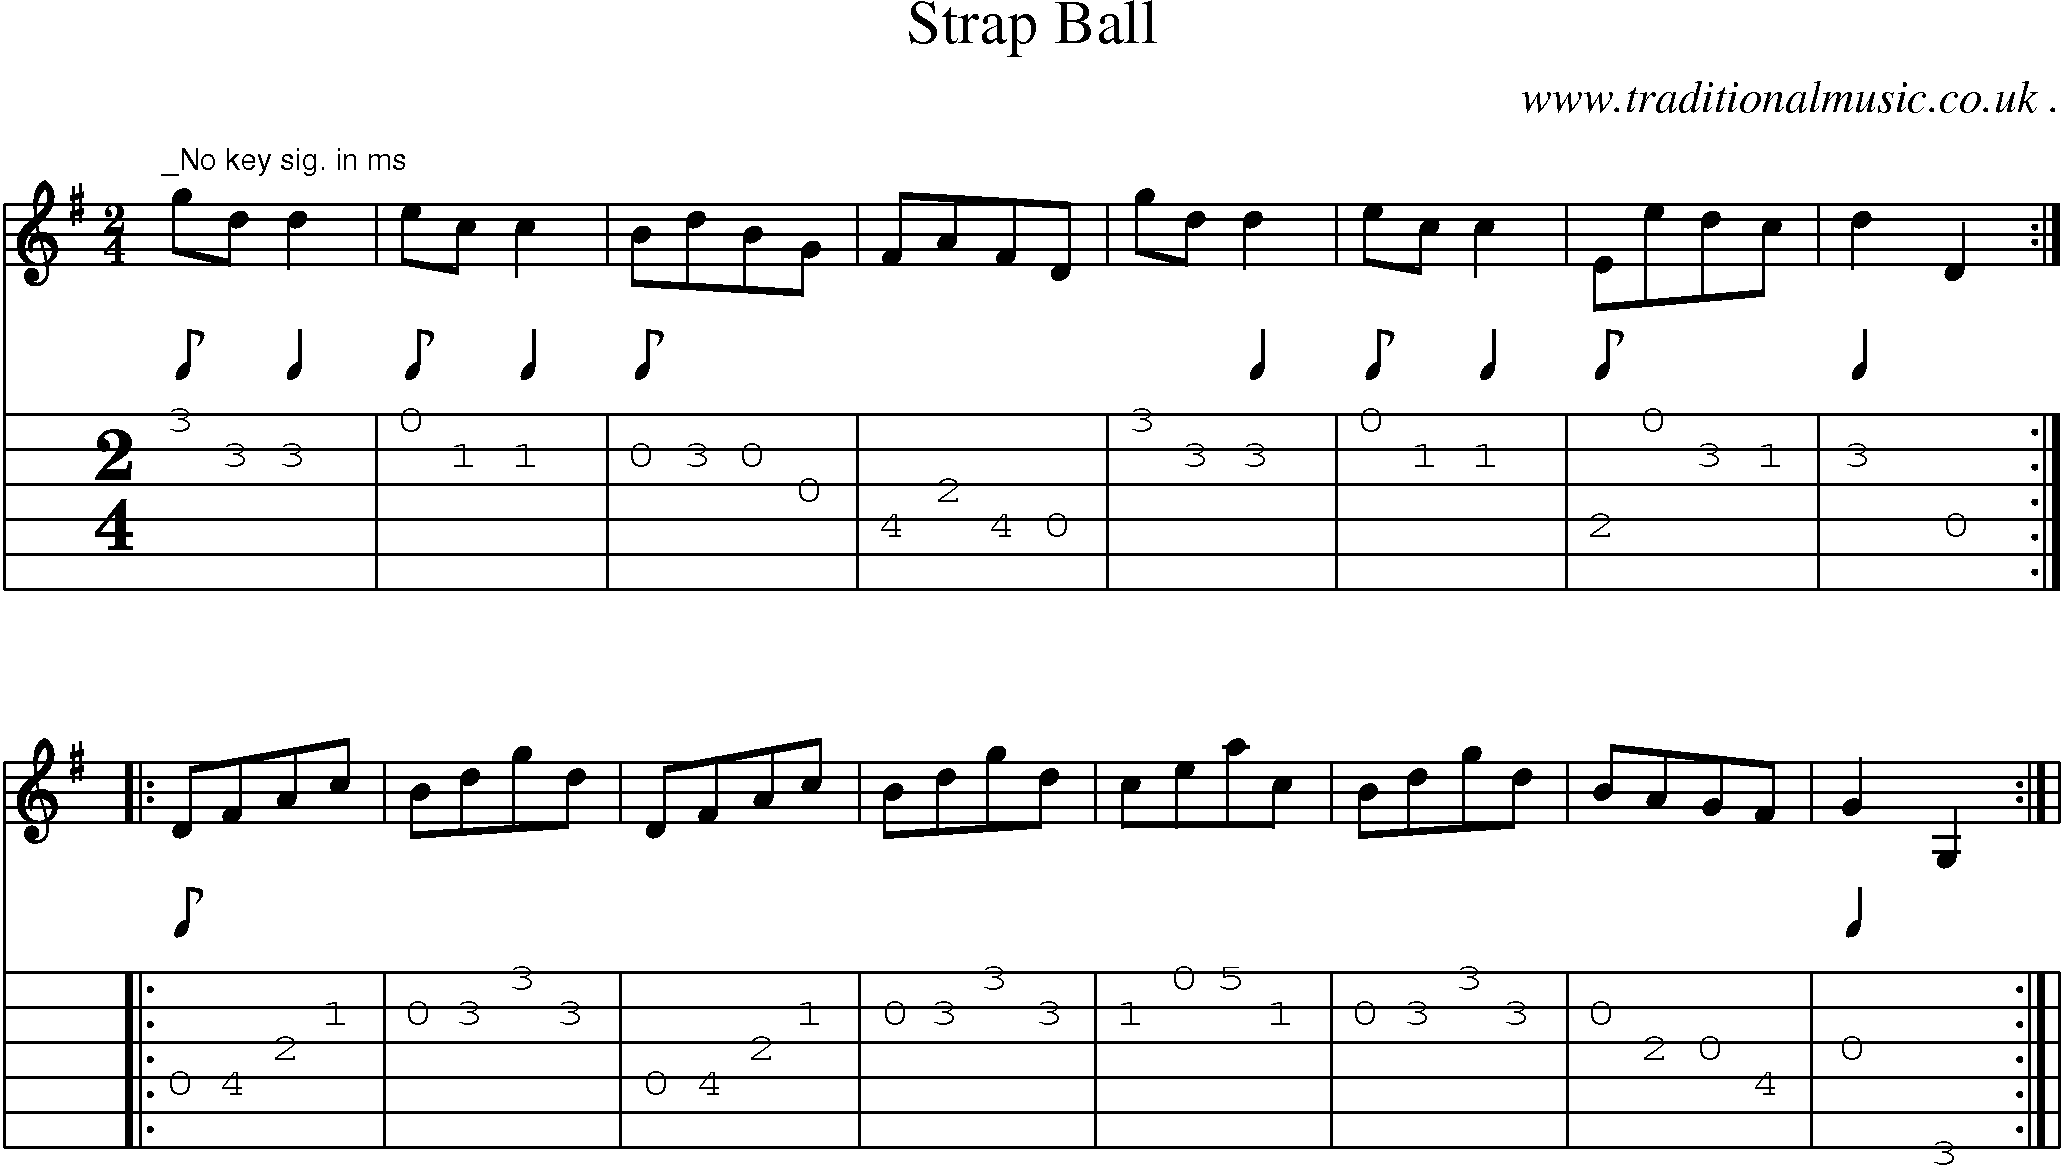 Sheet-Music and Guitar Tabs for Strap Ball